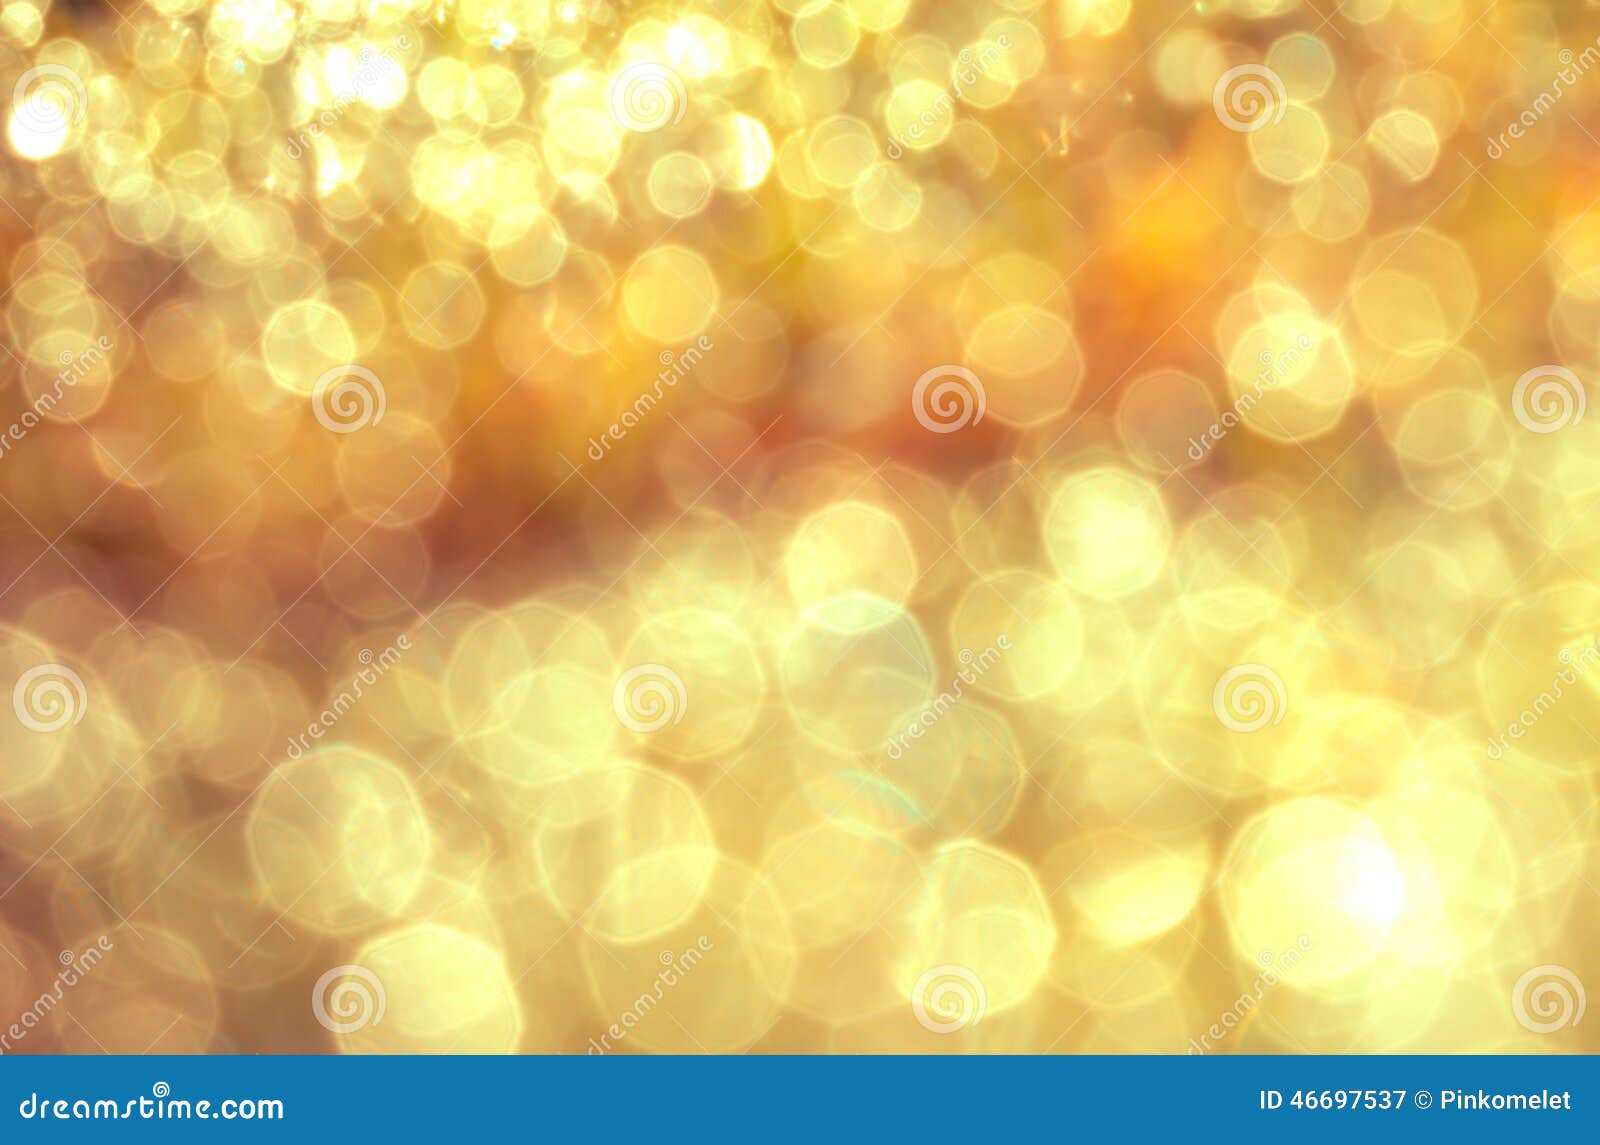 Abstract Blurred Bokeh Natural Lighting Background Stock Image - Image of  blue, celebration: 46697537